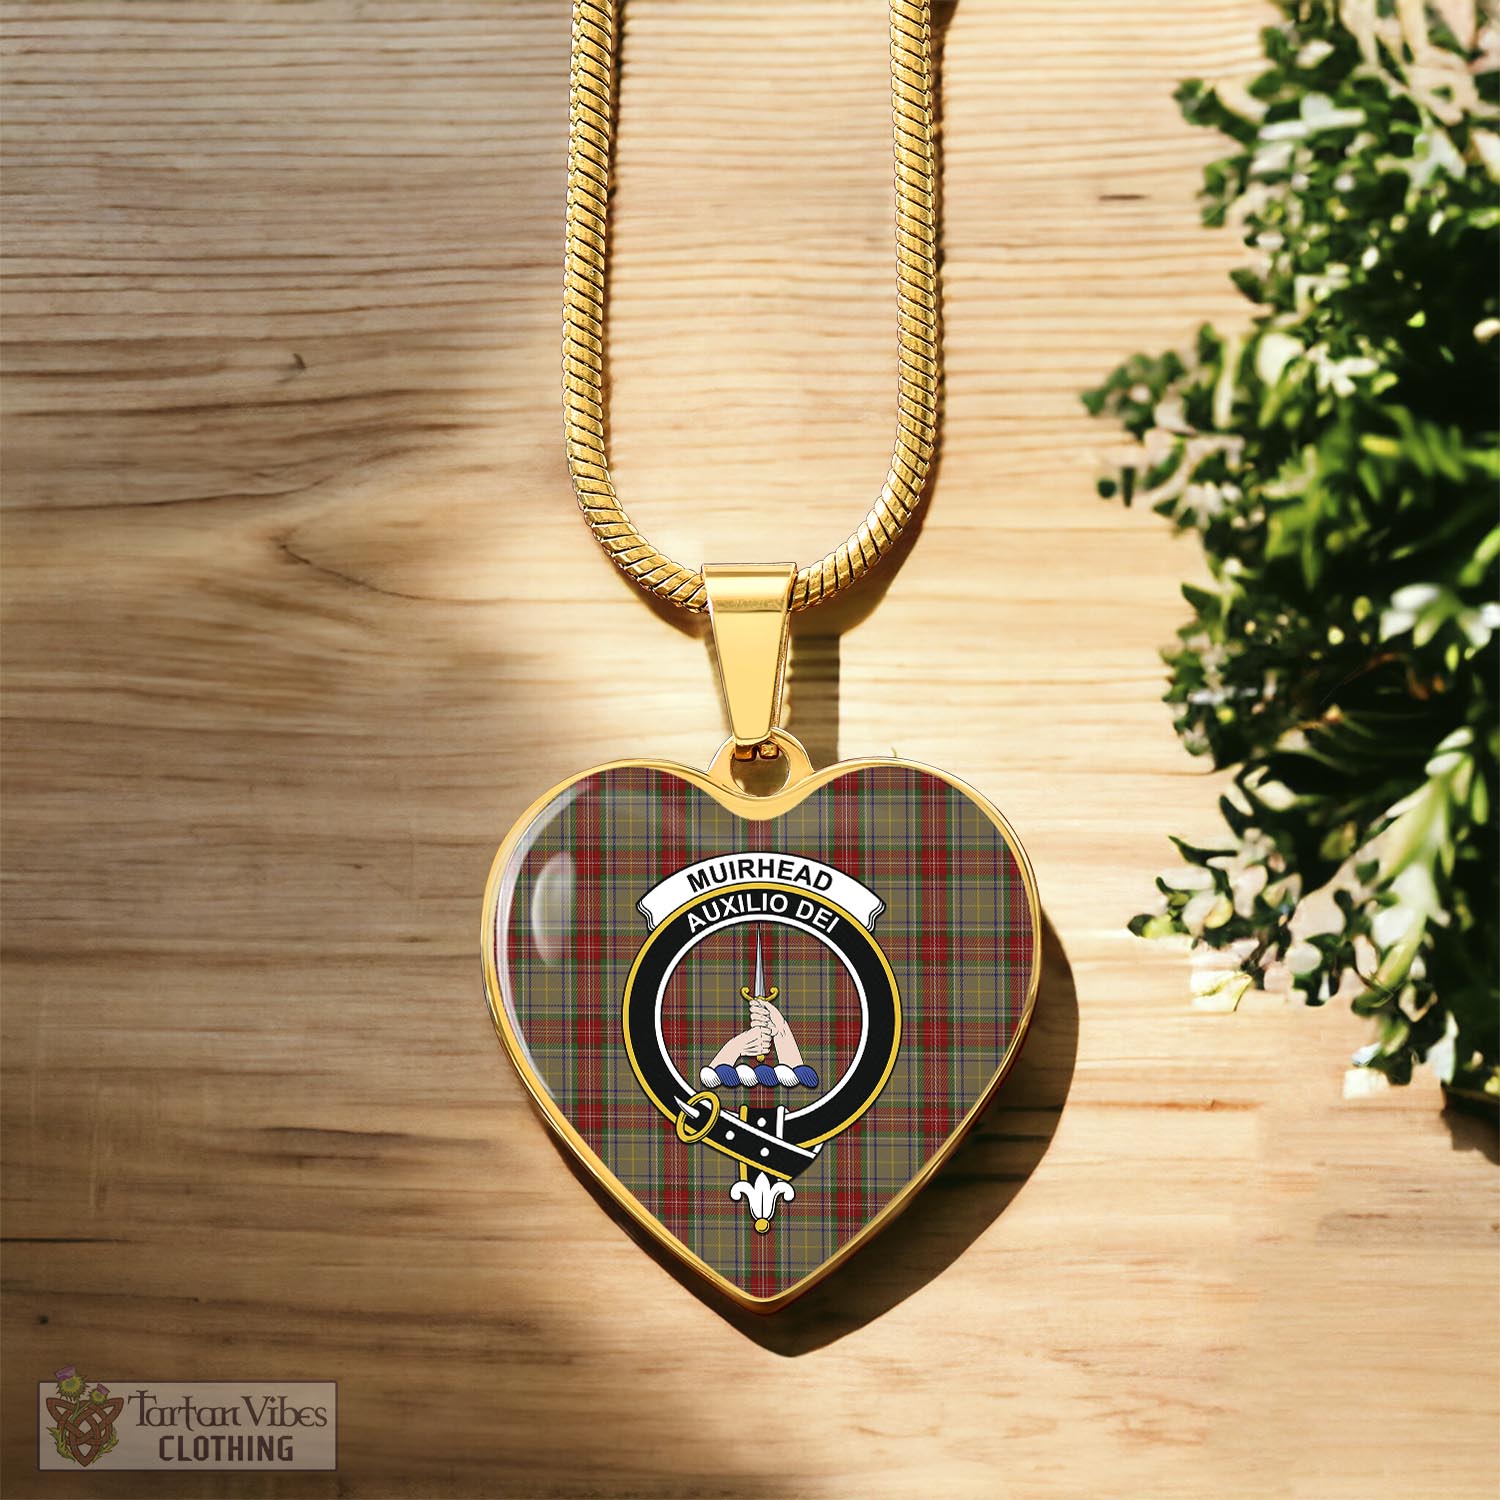 Tartan Vibes Clothing Muirhead Old Tartan Heart Necklace with Family Crest